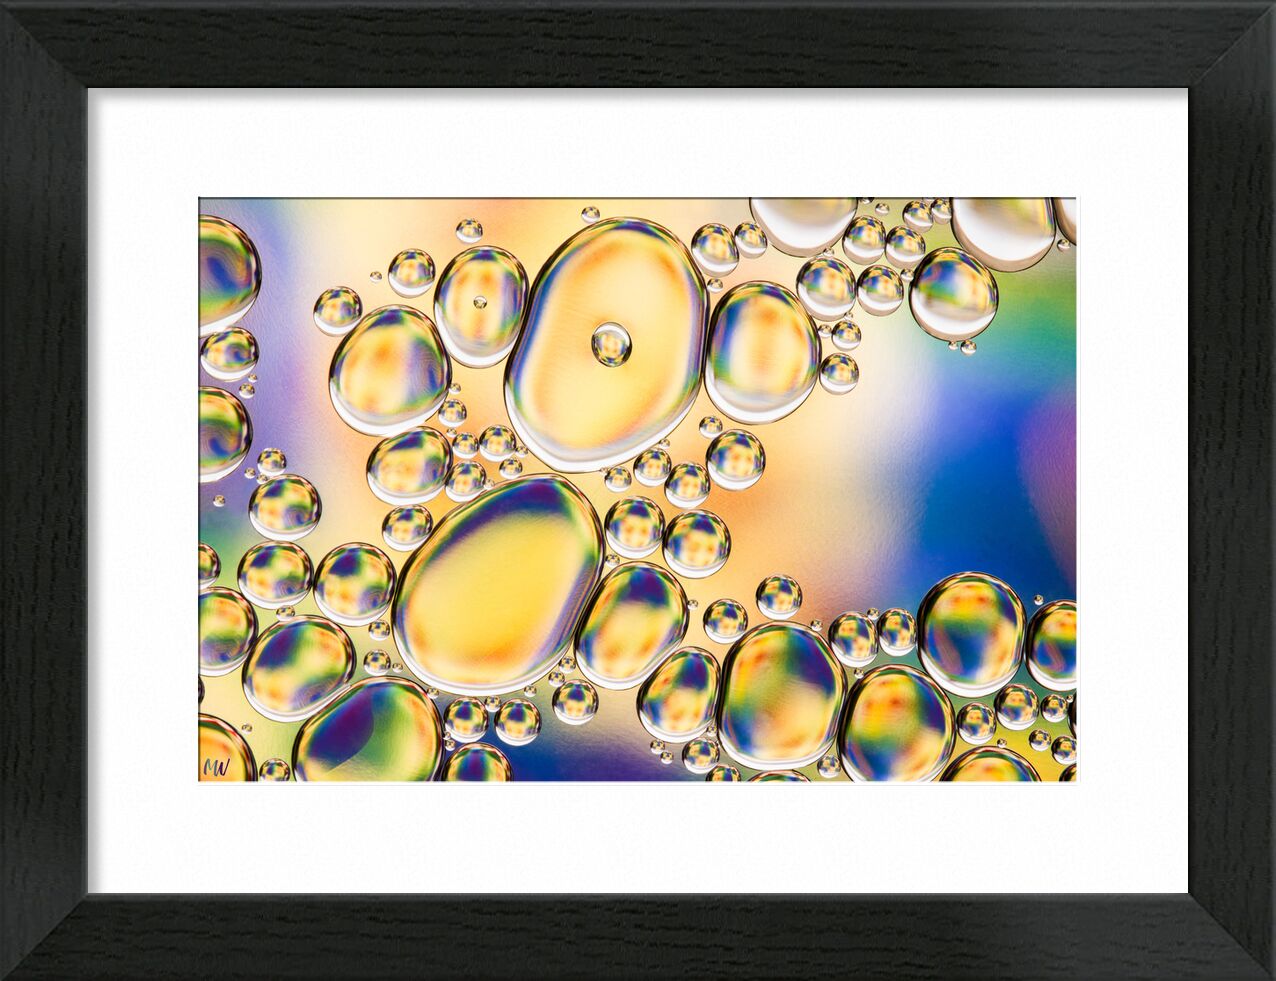 Oily bubbles #4 from Mickaël Weber, Prodi Art, yellow, blue, color, droplets, goutelettes, Bulles, drops, modern, modern, water, water, shapes, formes, fun, oily, oil, huile, green, macro, abstract, bebbles